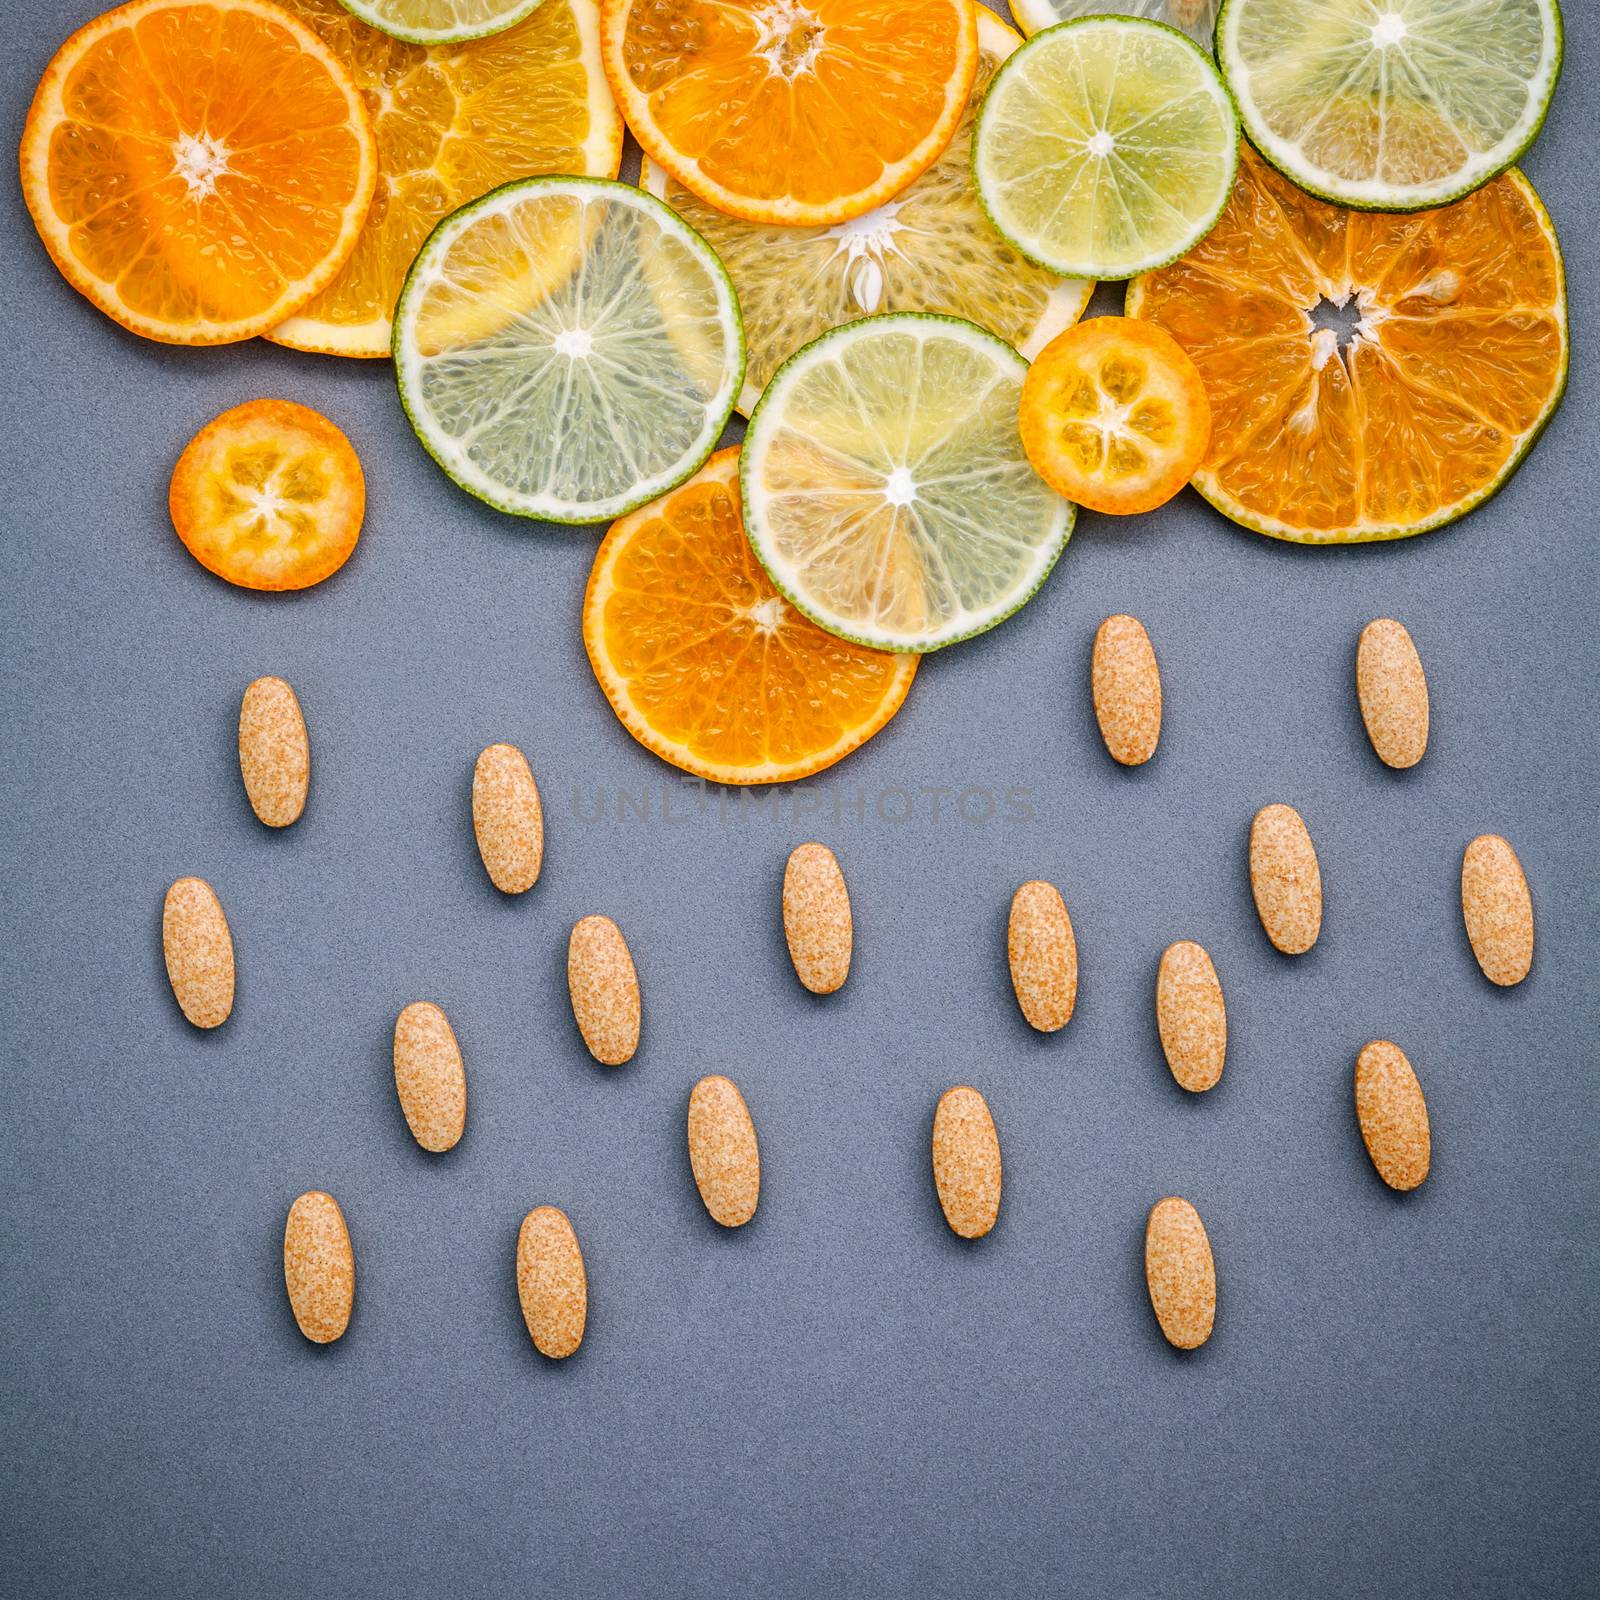 Healthy foods and medicine concept. Pills of vitamin C and various citrus fruits sliced in the shape of cloud and raining. Mixed citrus fruits sliced lime,orange and lemon on gray background flat lay.